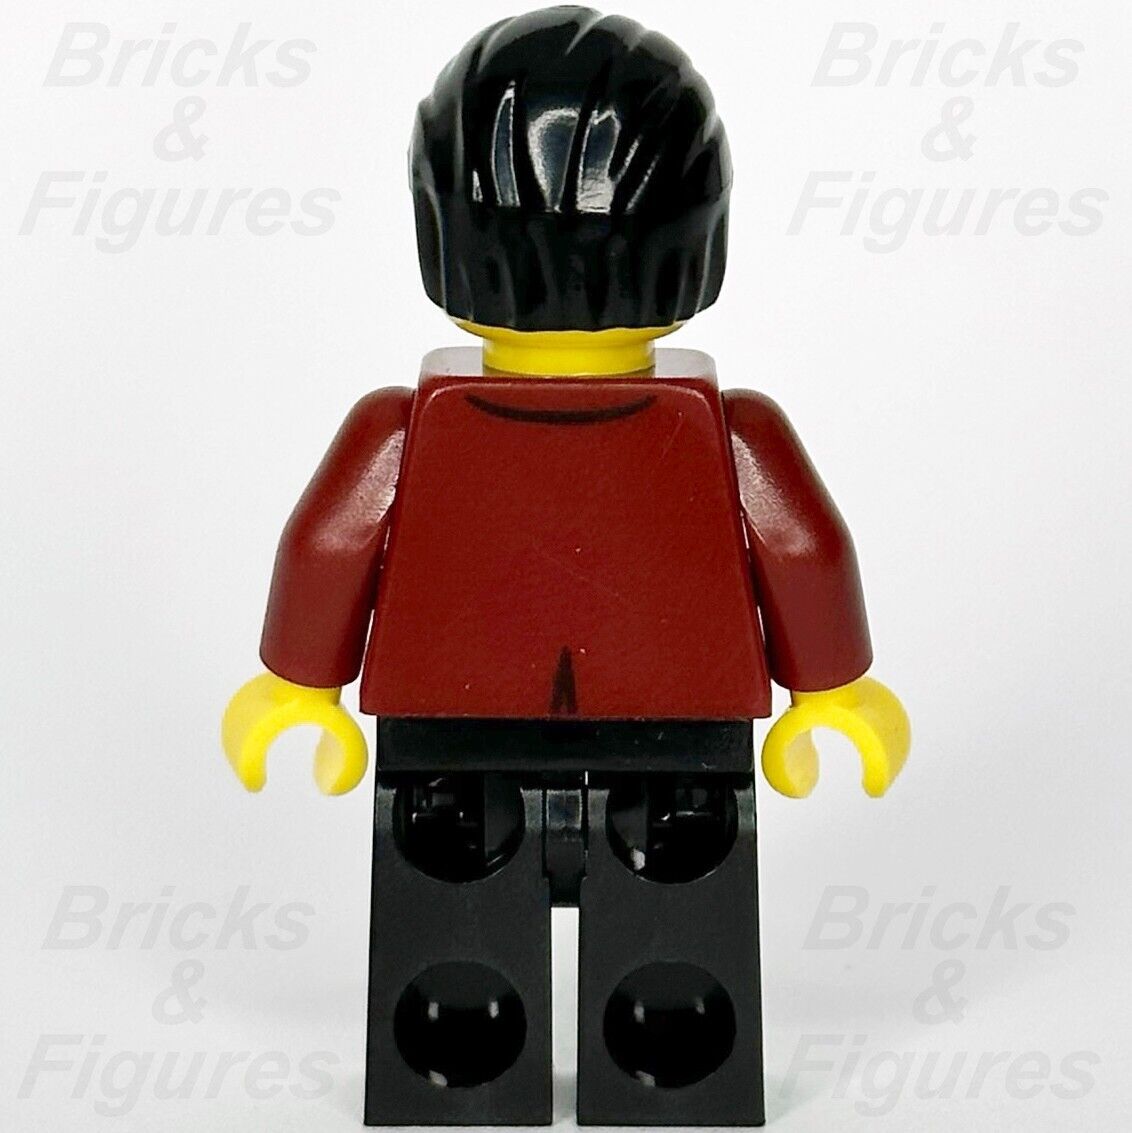 LEGO City Police Bandit Crook Vito Minifigure Town Police 60242 cty1108 Minifig 3